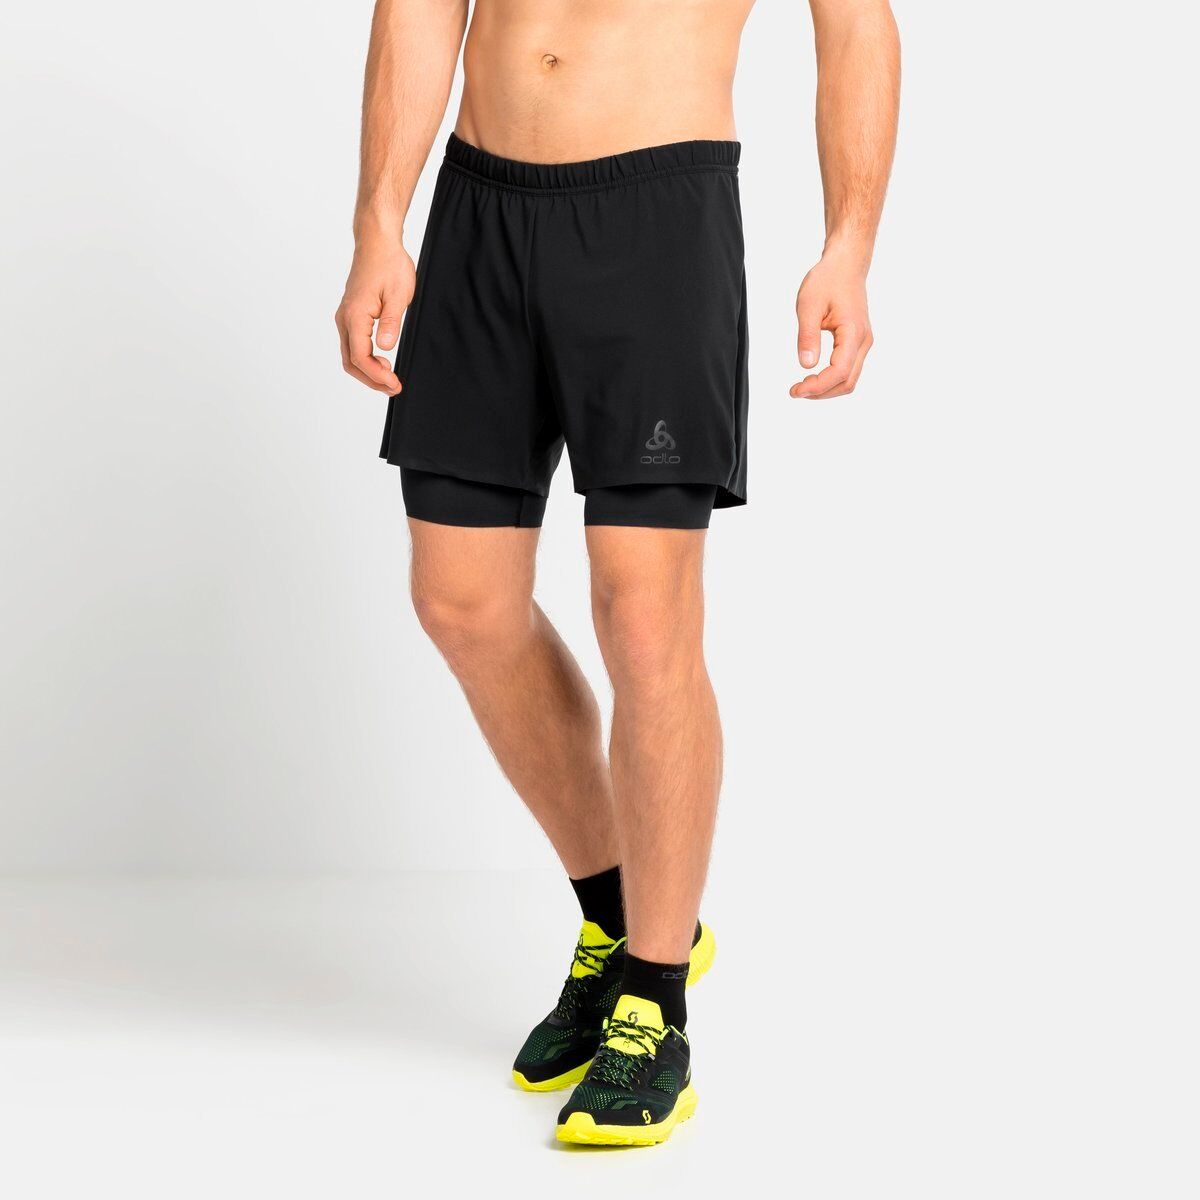 https://images.hardloop.fr/246414/odlo-2-in-1-shorts-zeroweight-5-inch-short-running-homme.jpg?w=auto&h=auto&q=80